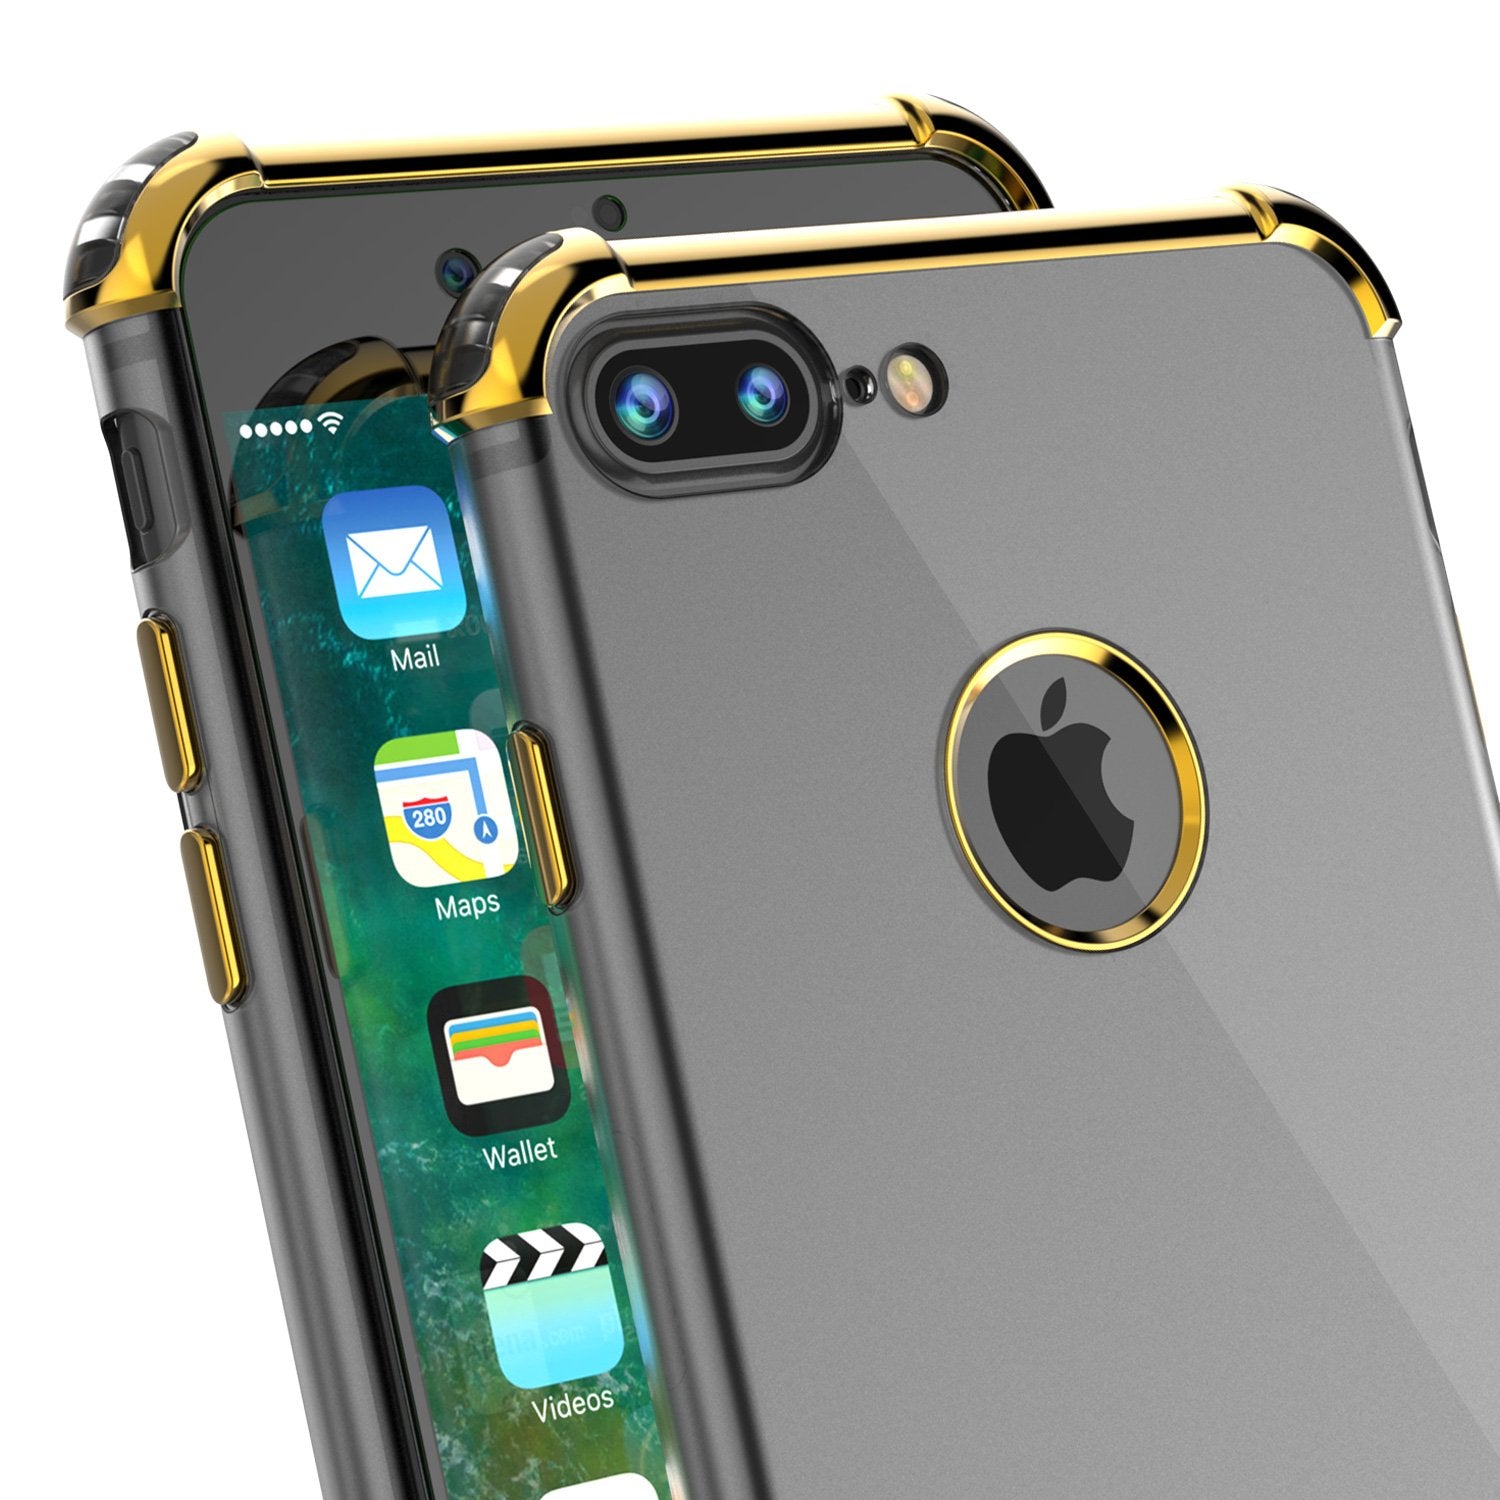 iPhone 8 PLUS Case, Punkcase [BLAZE SERIES] Protective Cover W/ PunkShield Screen Protector [Shockproof] [Slim Fit] for Apple iPhone 7/8/6/6s PLUS [Gold] - PunkCase NZ